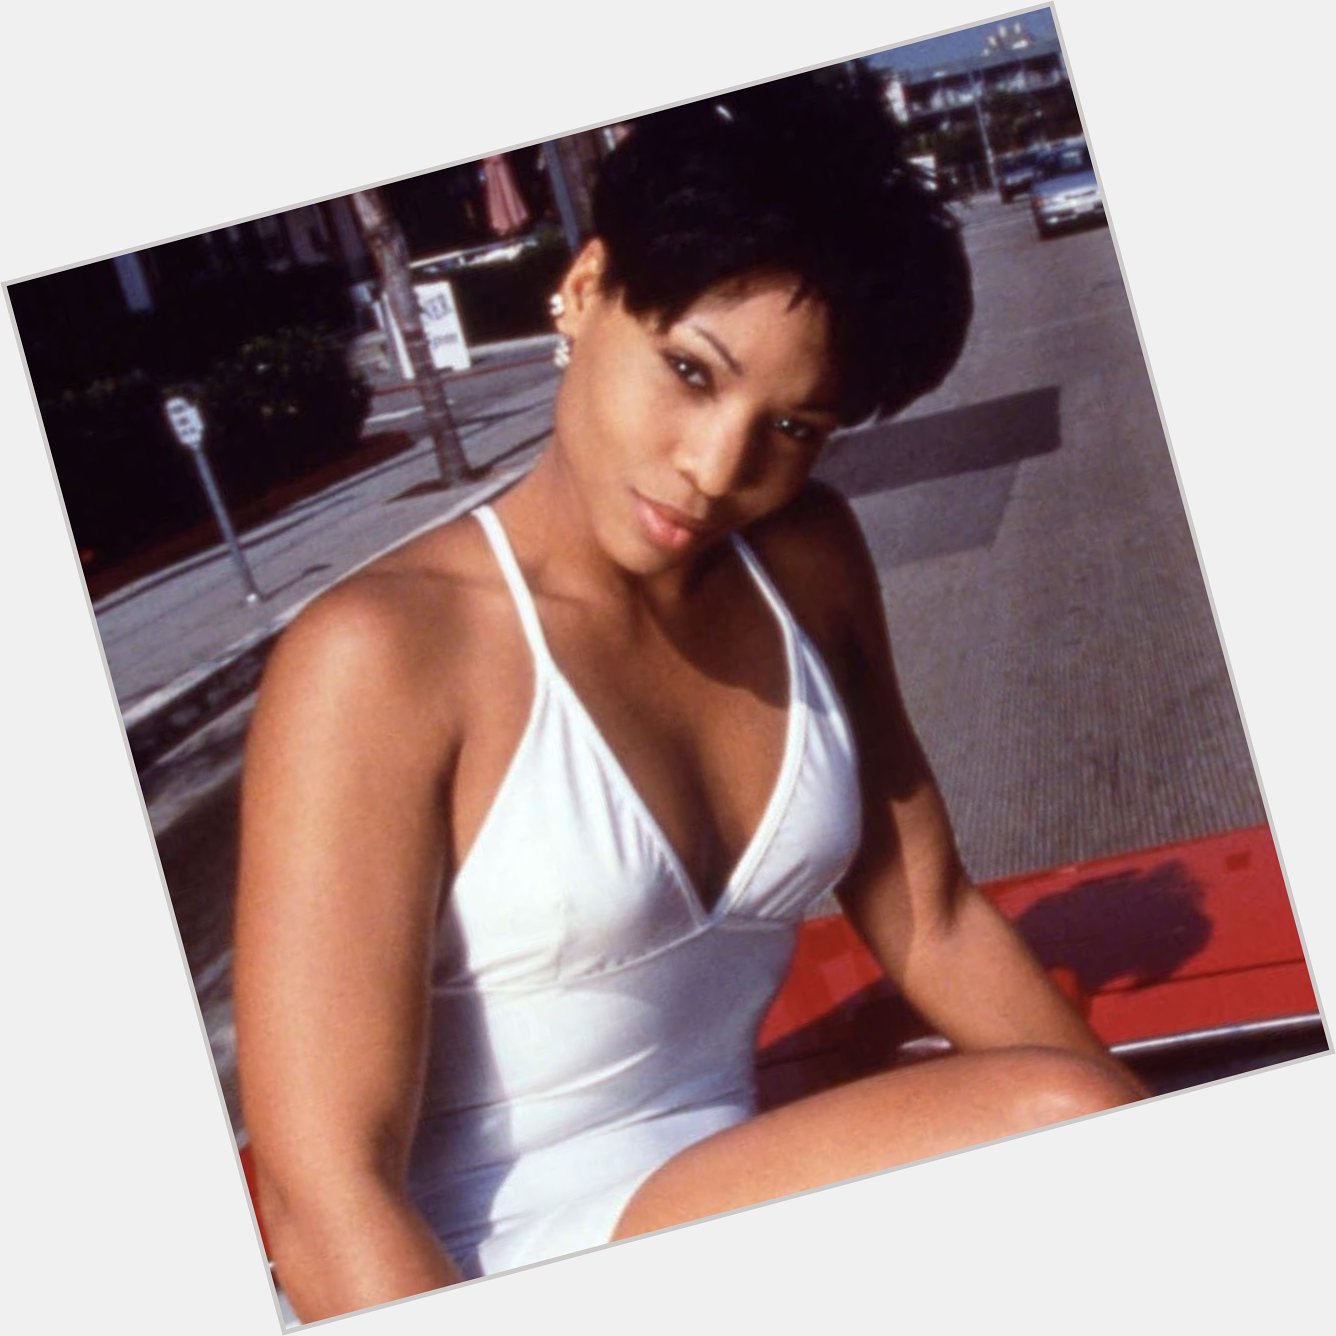 Happy 49th Birthday to R&B legend Adina Howard!

What are your favorite songs by her? 